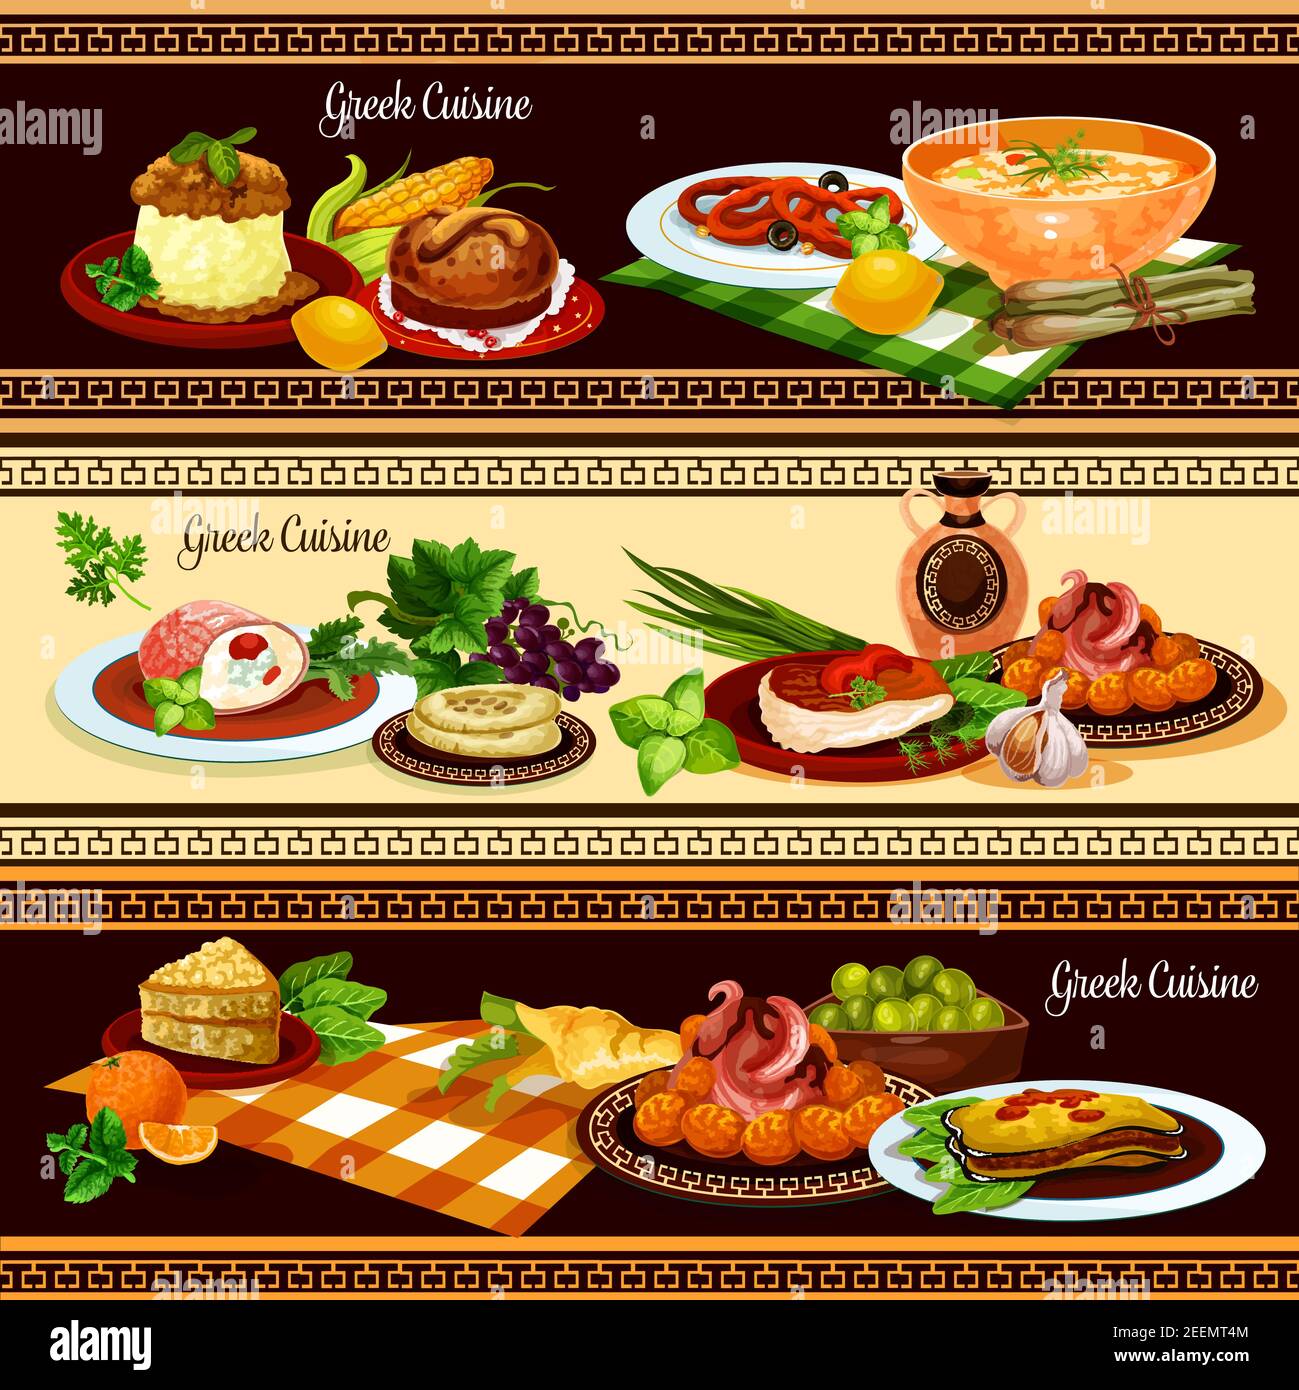 Greek cuisine restaurant banners. Meat roll with cheese and pickled olive, pita bread with herbs, fried fish with vegetables, eggplant casserole mouss Stock Vector